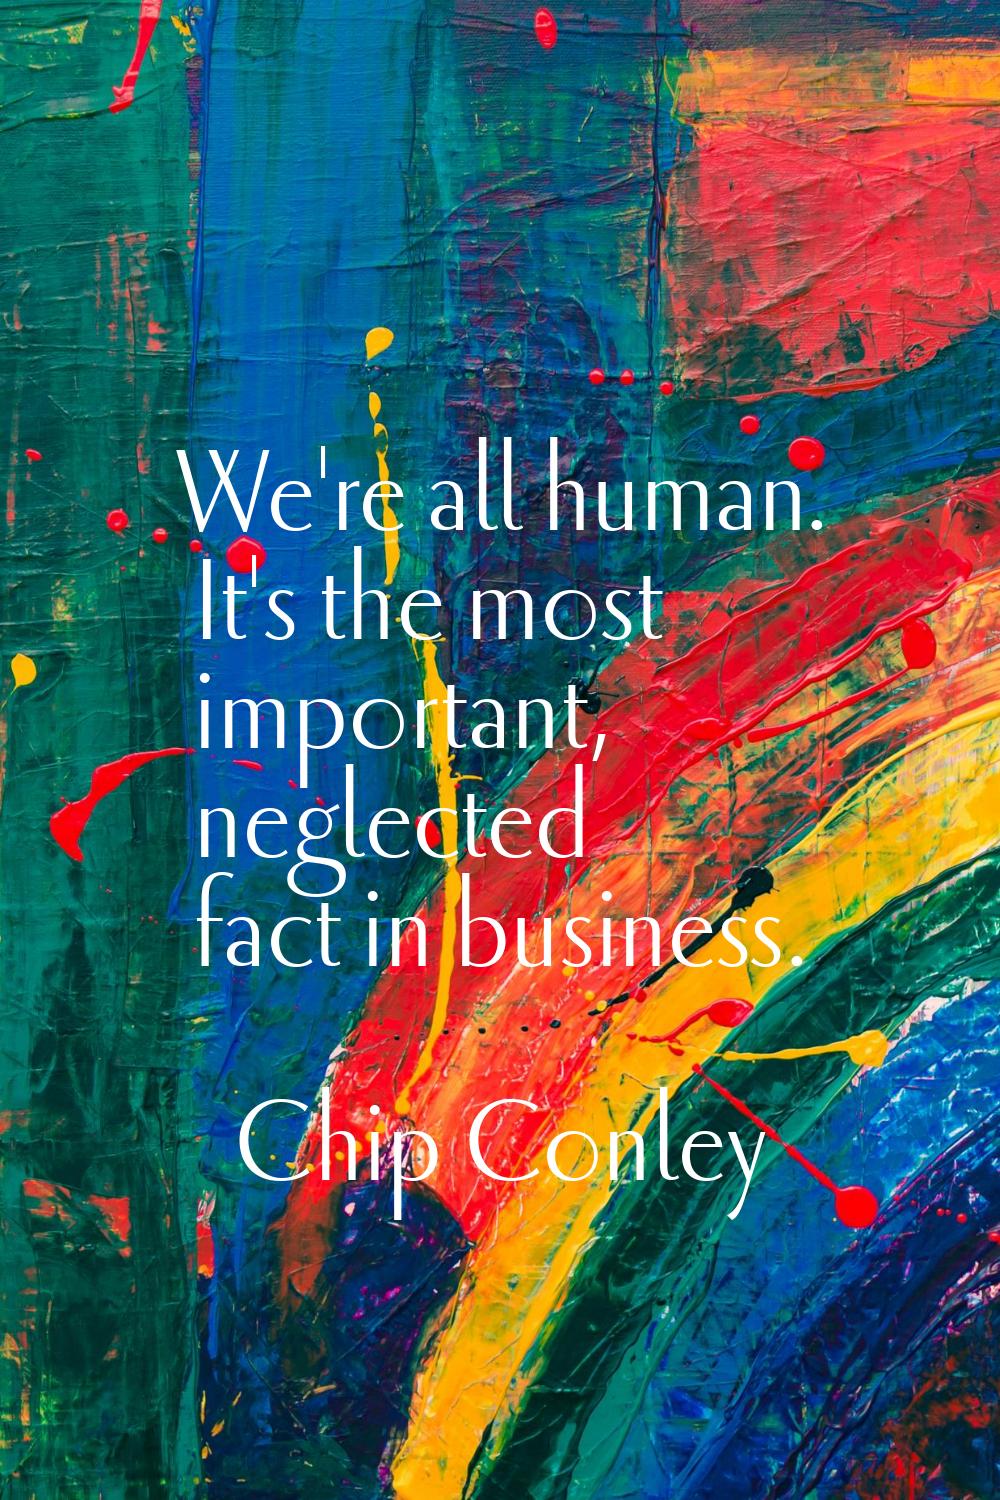 We're all human. It's the most important, neglected fact in business.